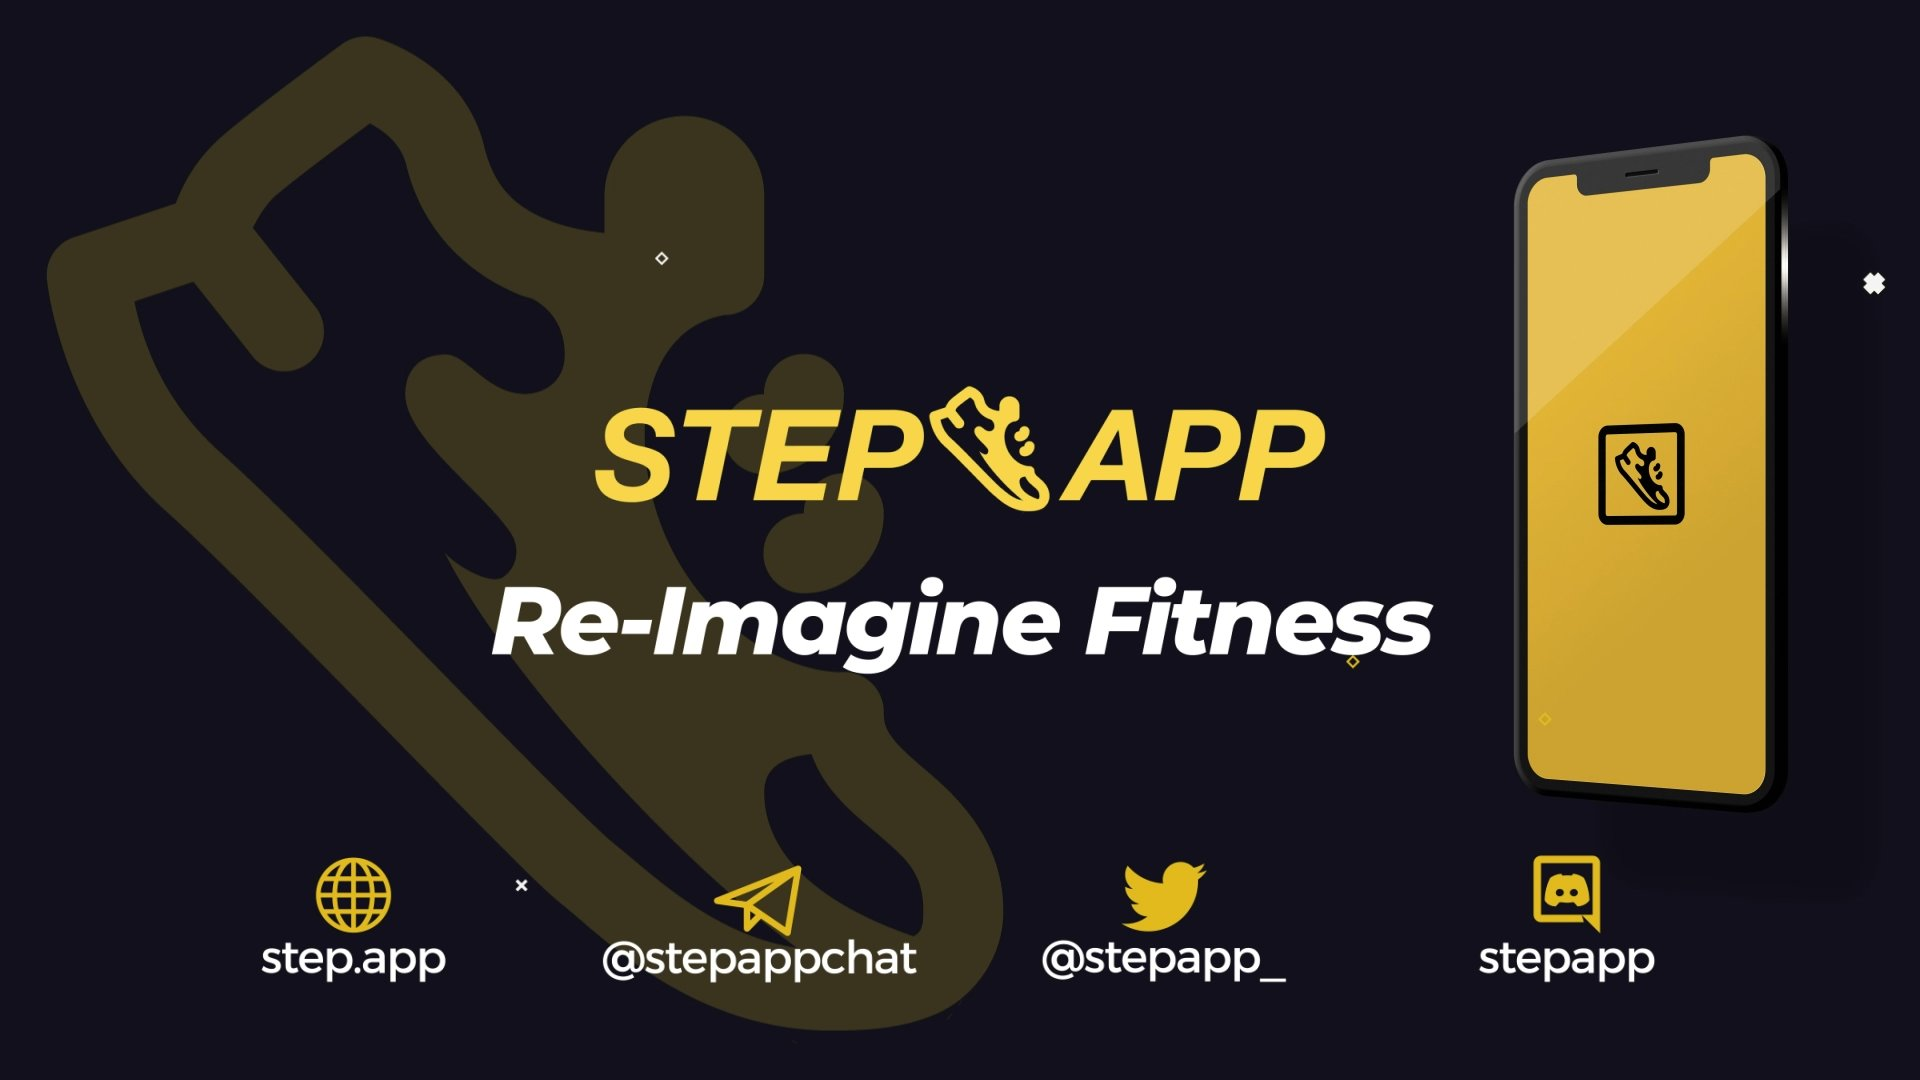 Step App is a move-to-earn platform